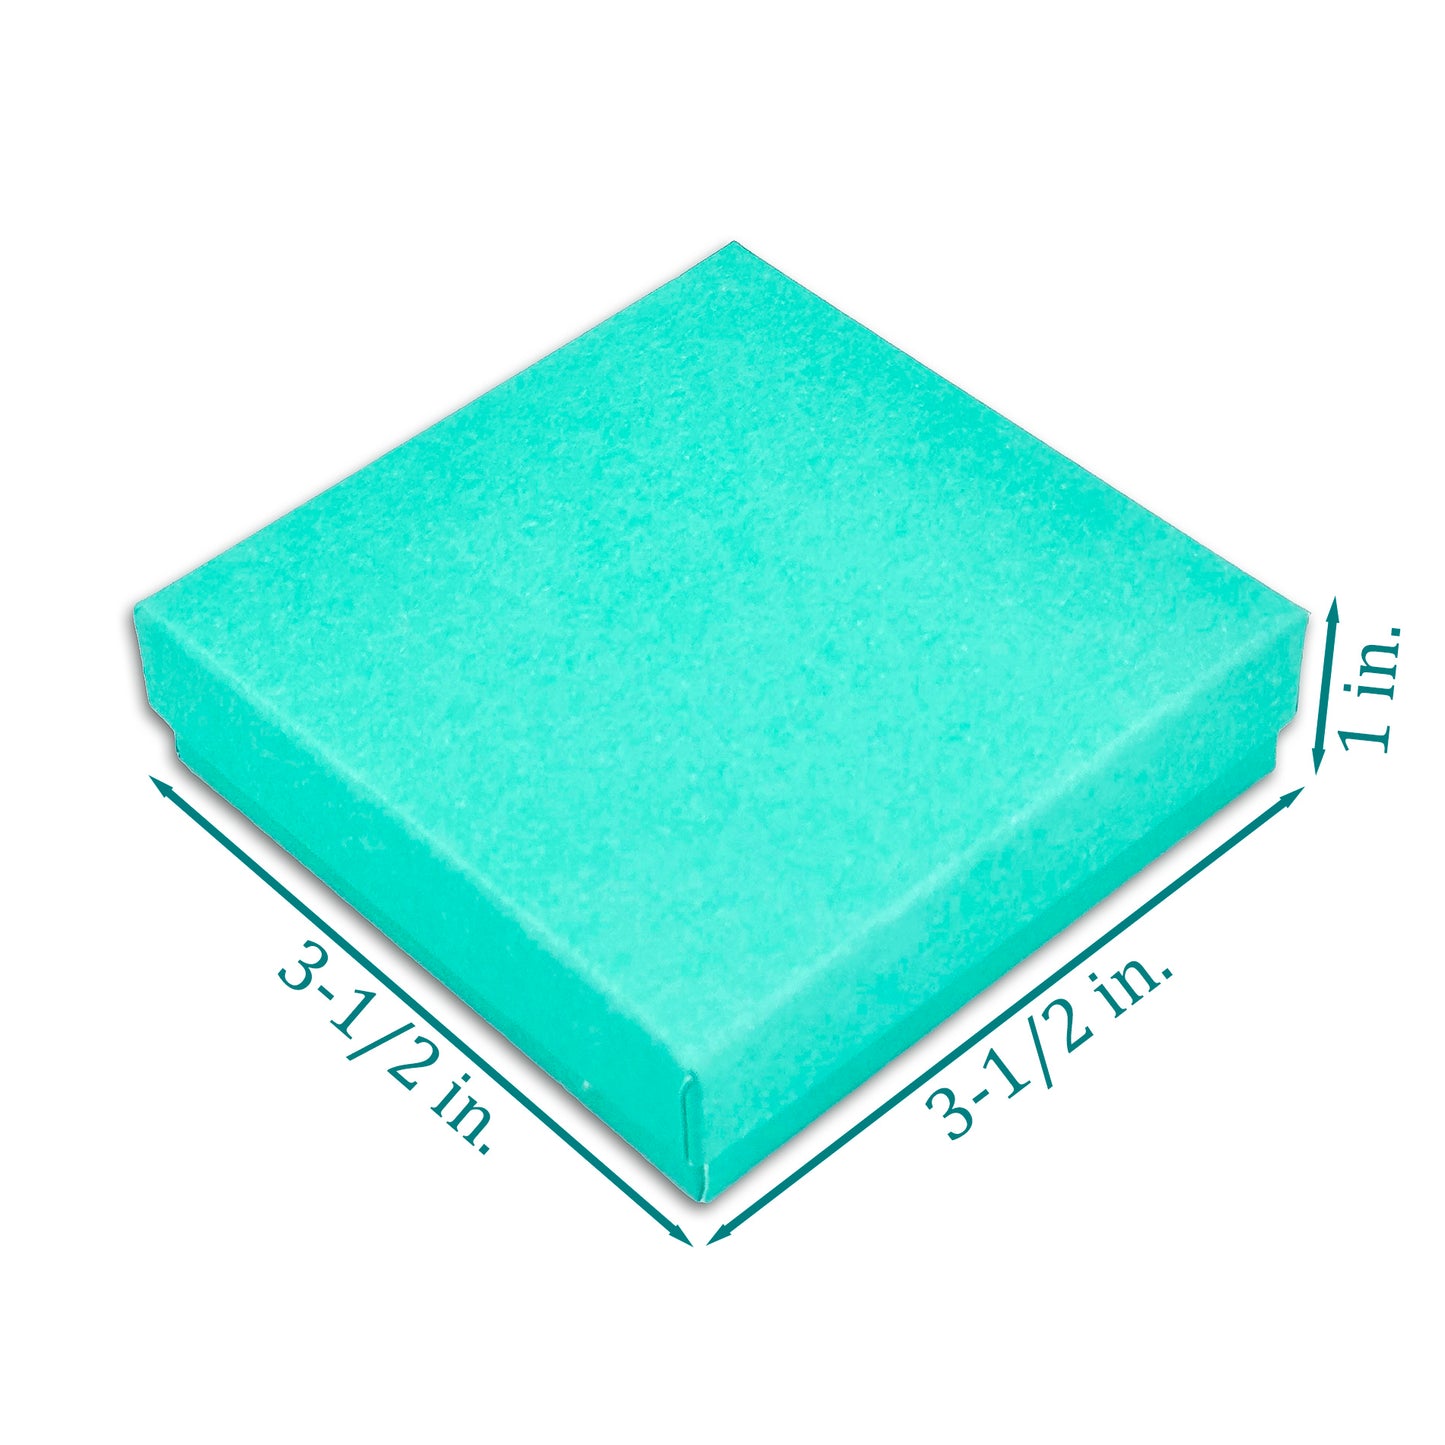 3 1/2" x 3 1/2" x 1" Teal Cotton Filled Paper Box